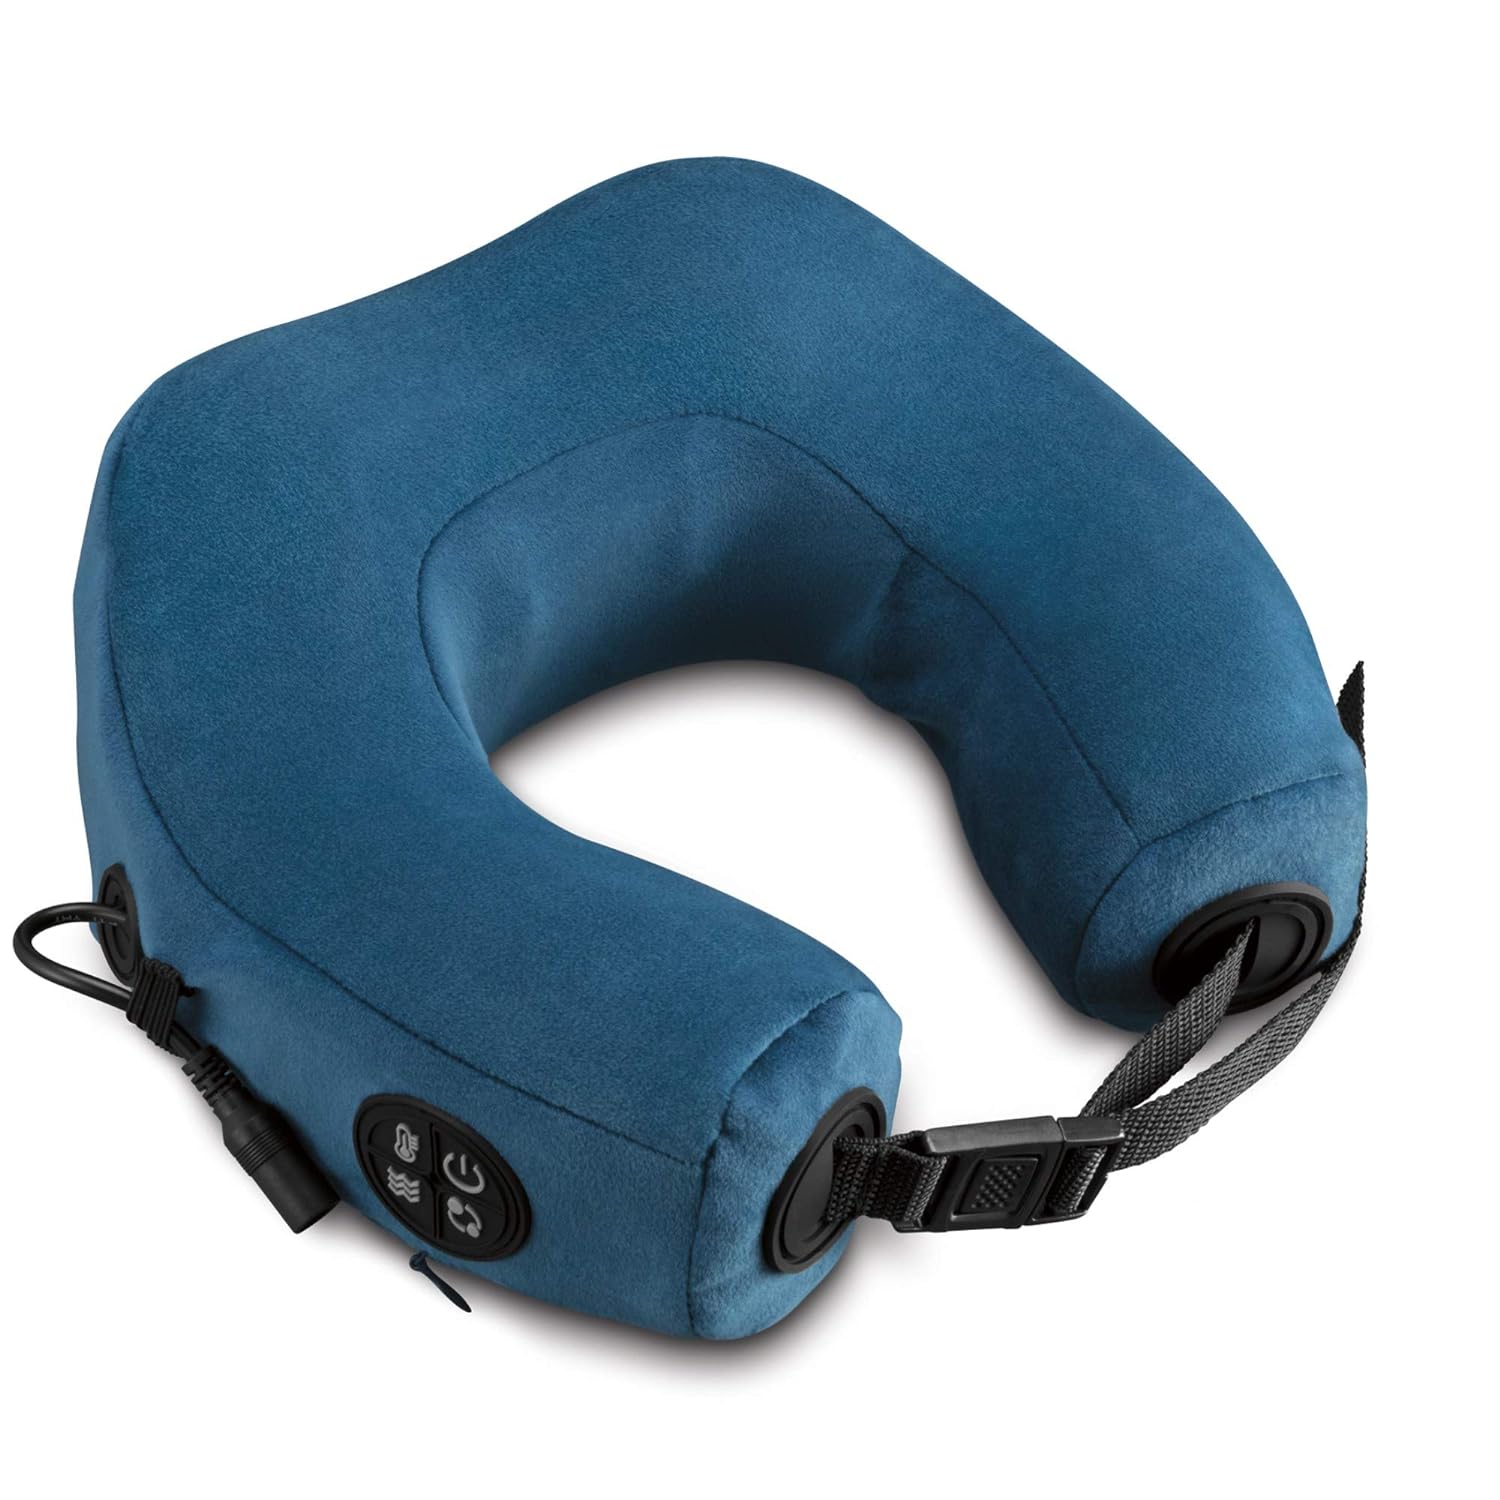 Conair Pillow for Neck and Shoulder Pain Travel Neck Pillow with Vibra